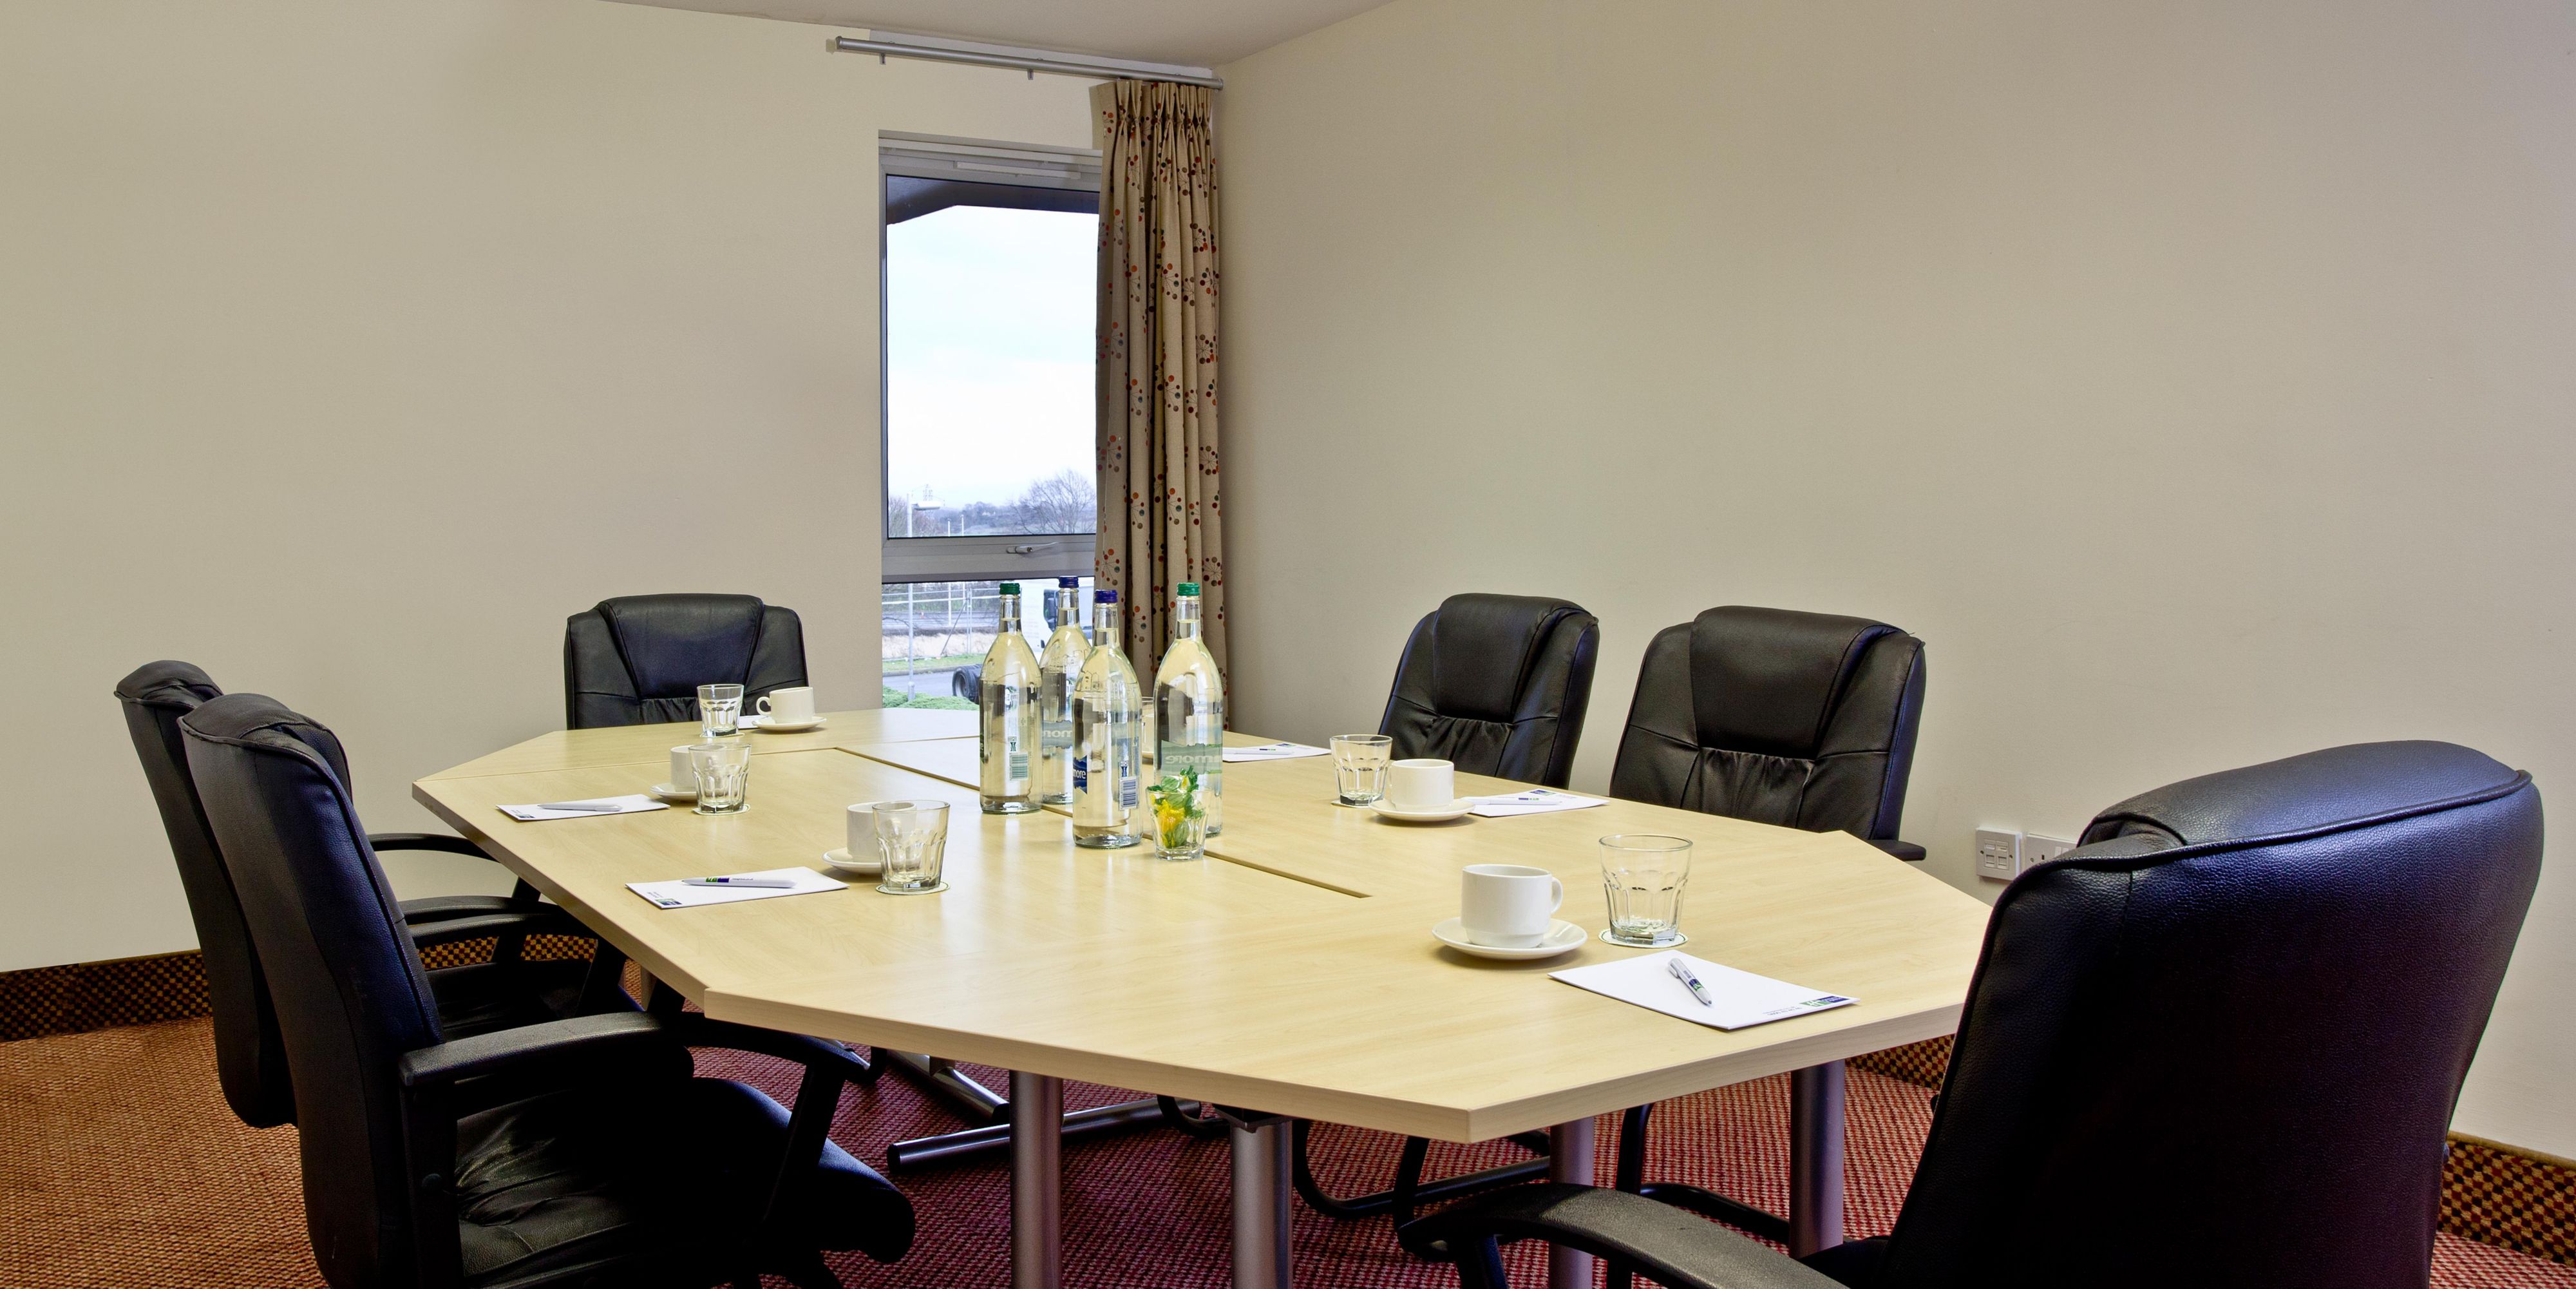 The hotel has two meeting rooms to hire if you need some private space to work or host a meeting